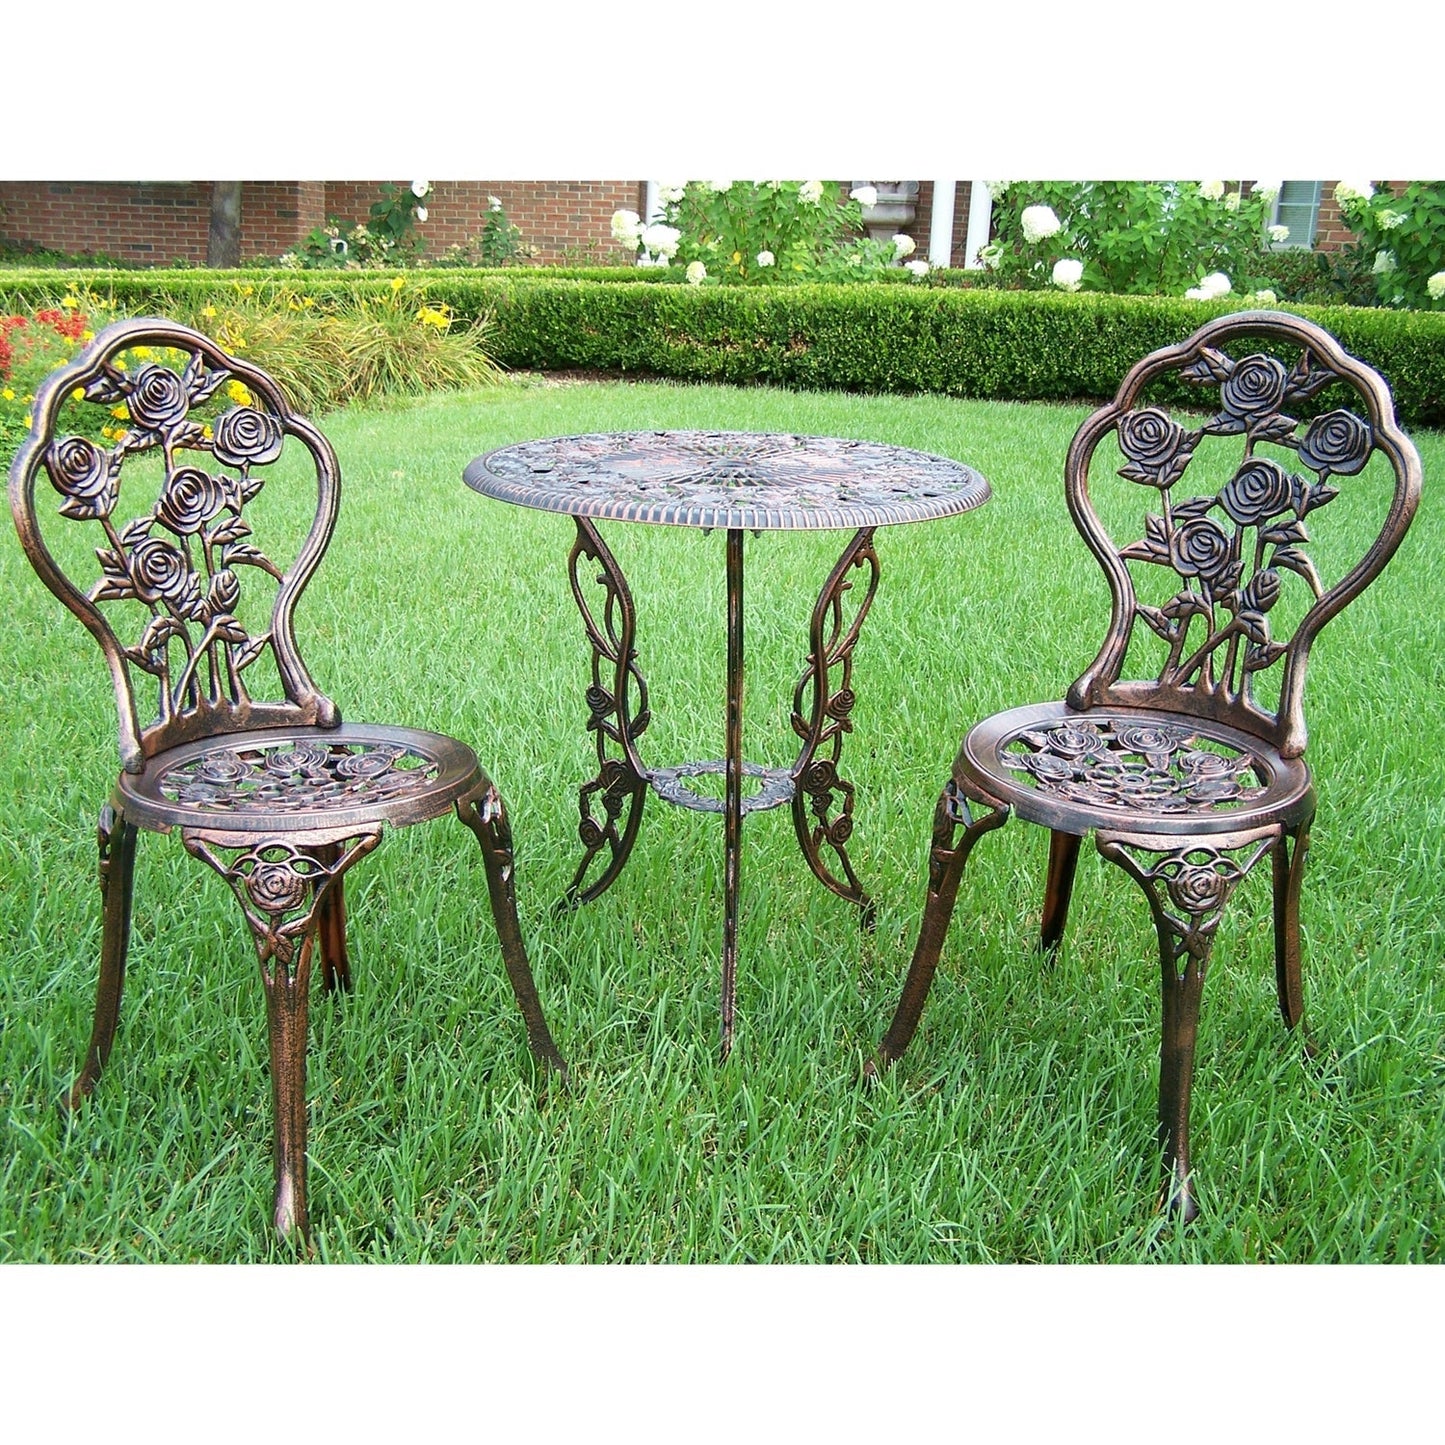 Outdoor > Outdoor Furniture > Patio Furniture Sets - 3-Piece Outdoor Bistro Set With Rose Design In Antique Bronze Finish